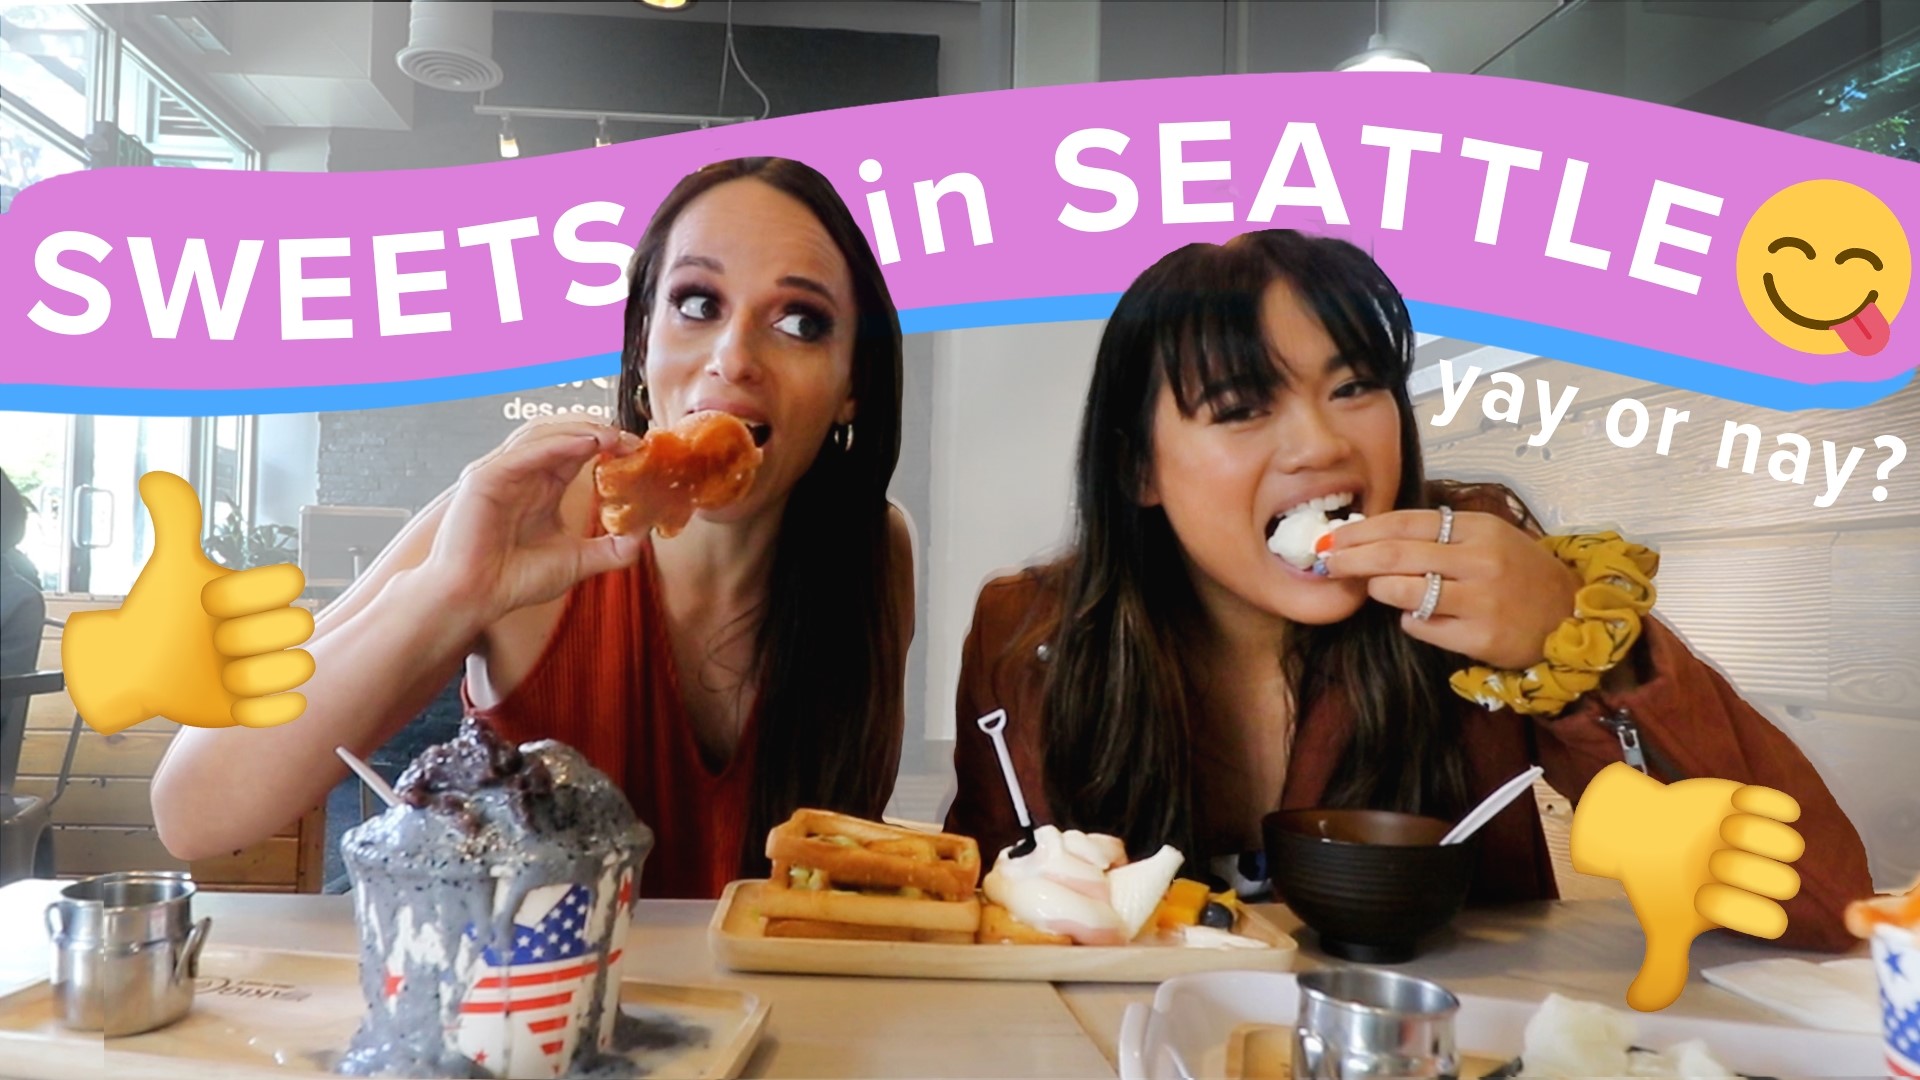 It’s time for a dessert tour of Seattle!
If there is one thing you should know about me, it’s that I have a HUGE sweet tooth!